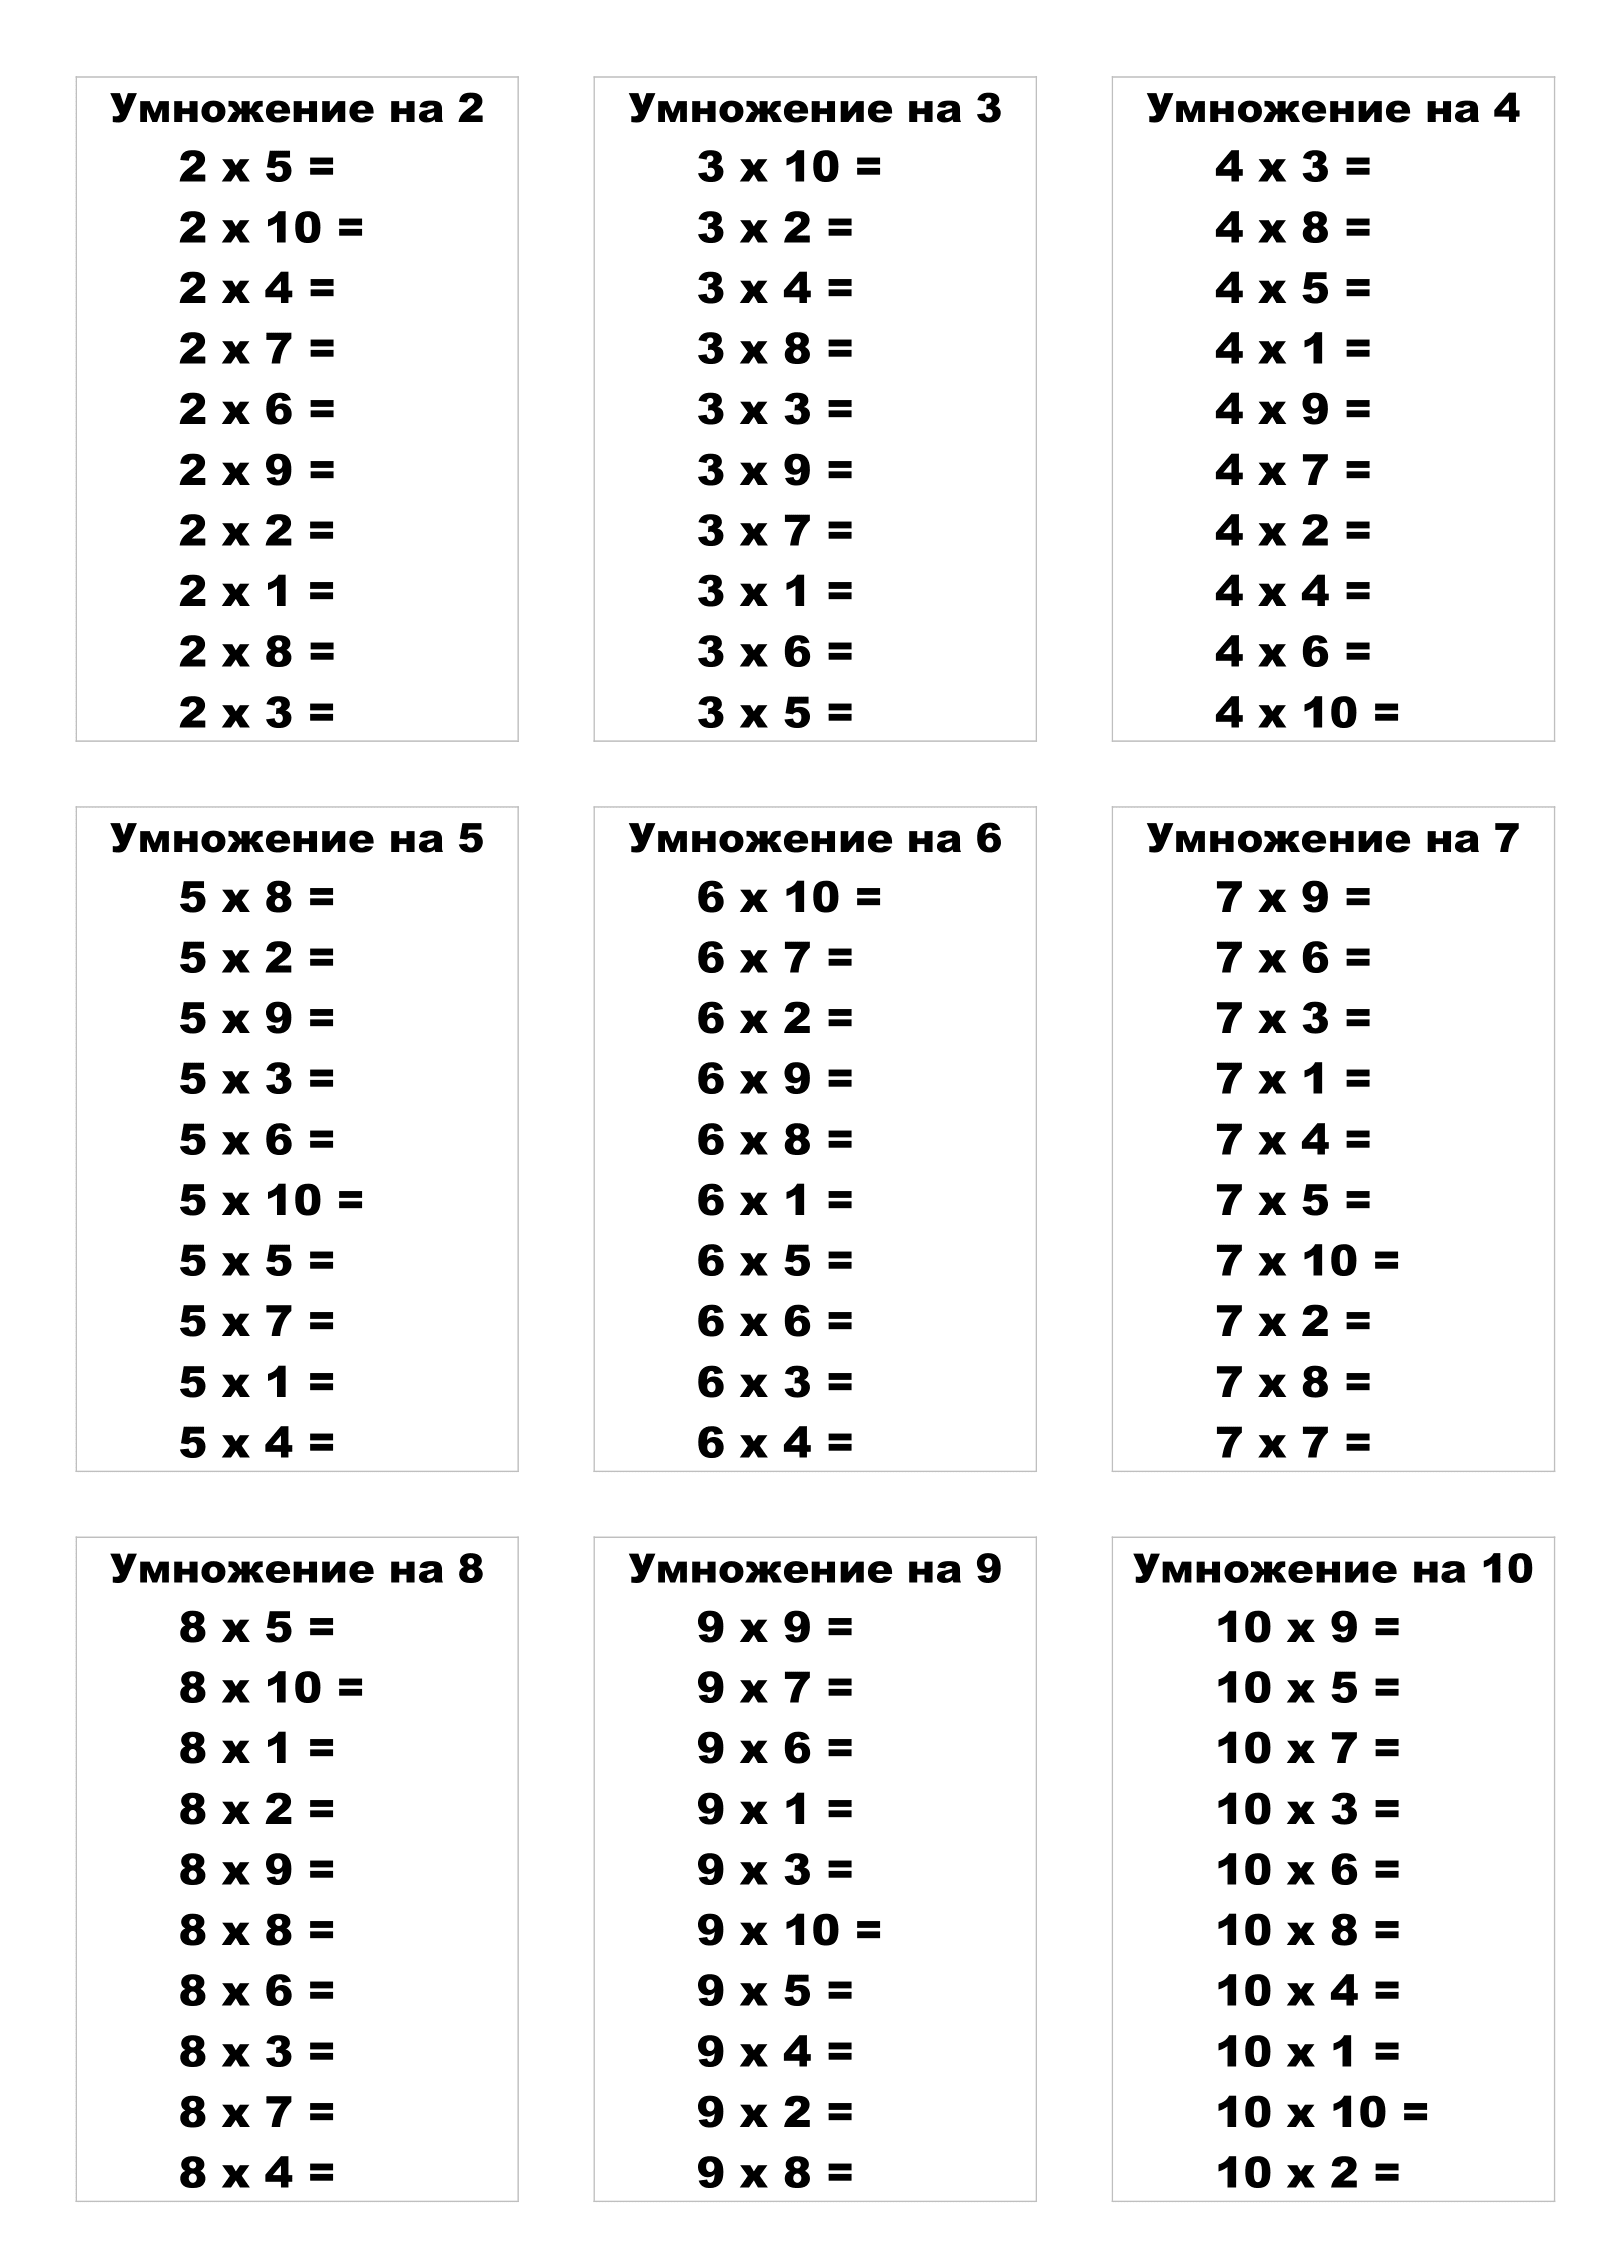 Multiplication Table Without Answers in Random Order. Print